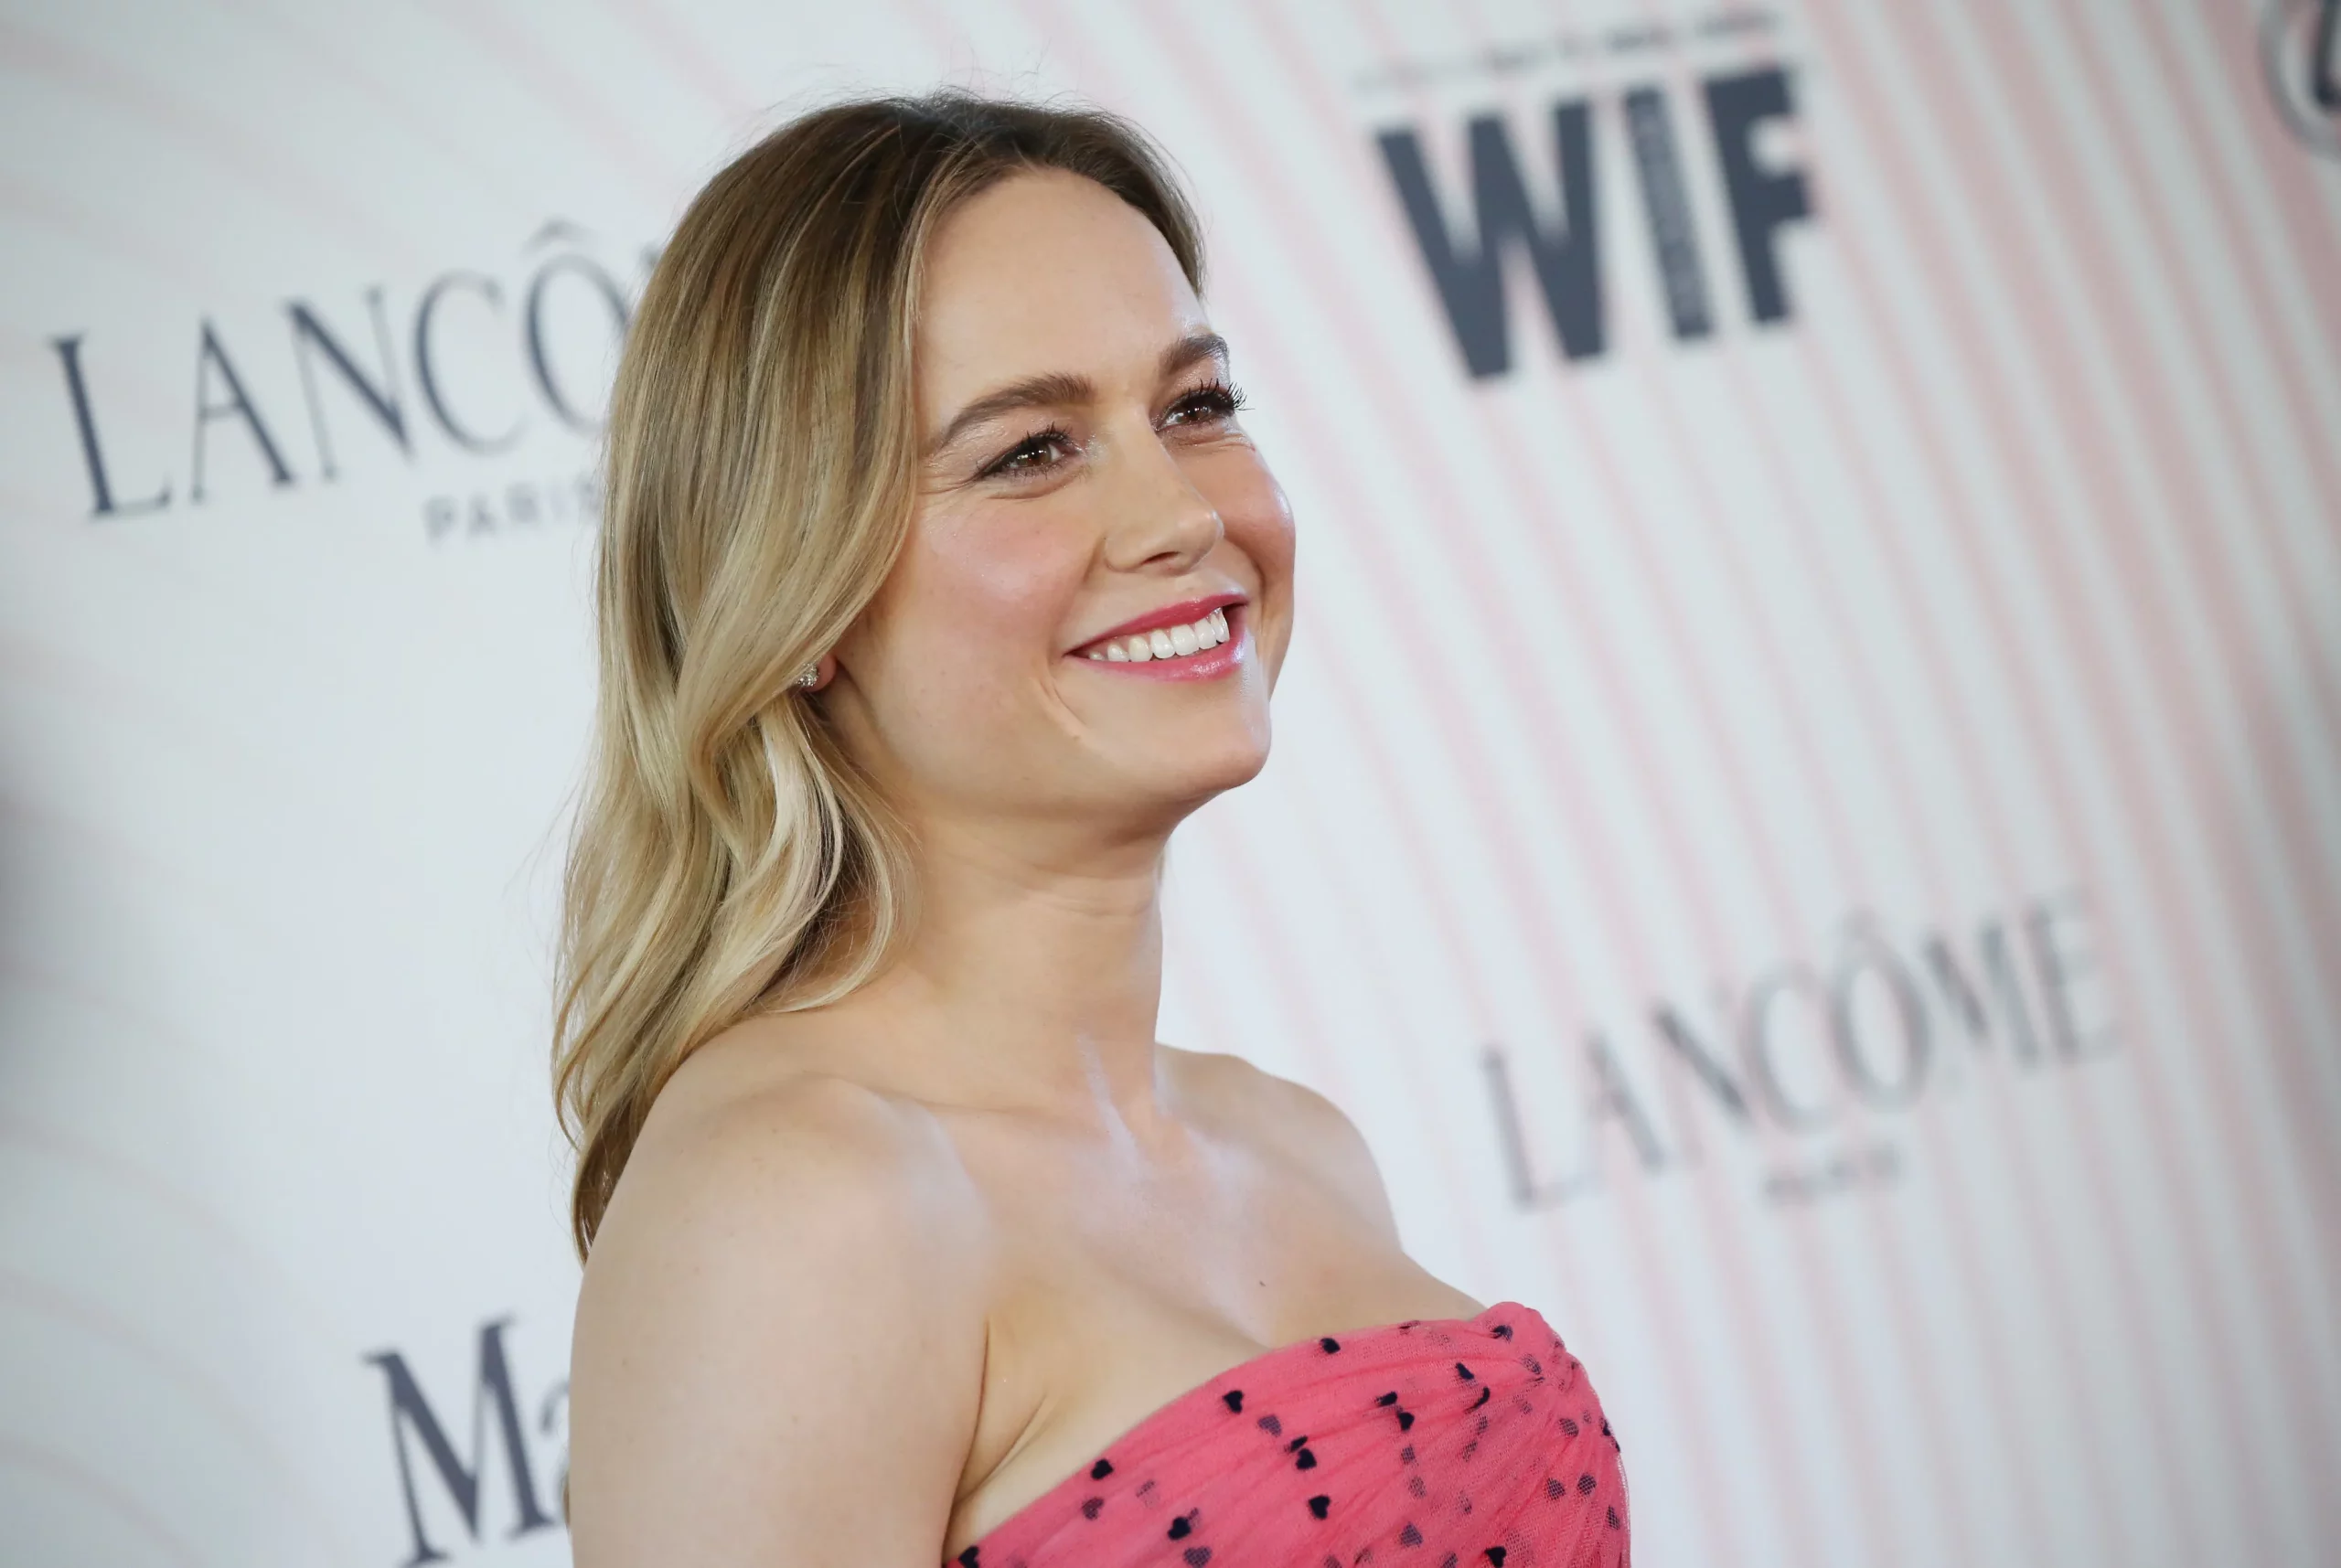 Discover the interesting story of Brie Larson net worth, from major prizes to wise investments. Discover the highs and lows of Brie Larson's financial journey and the secrets to her success.